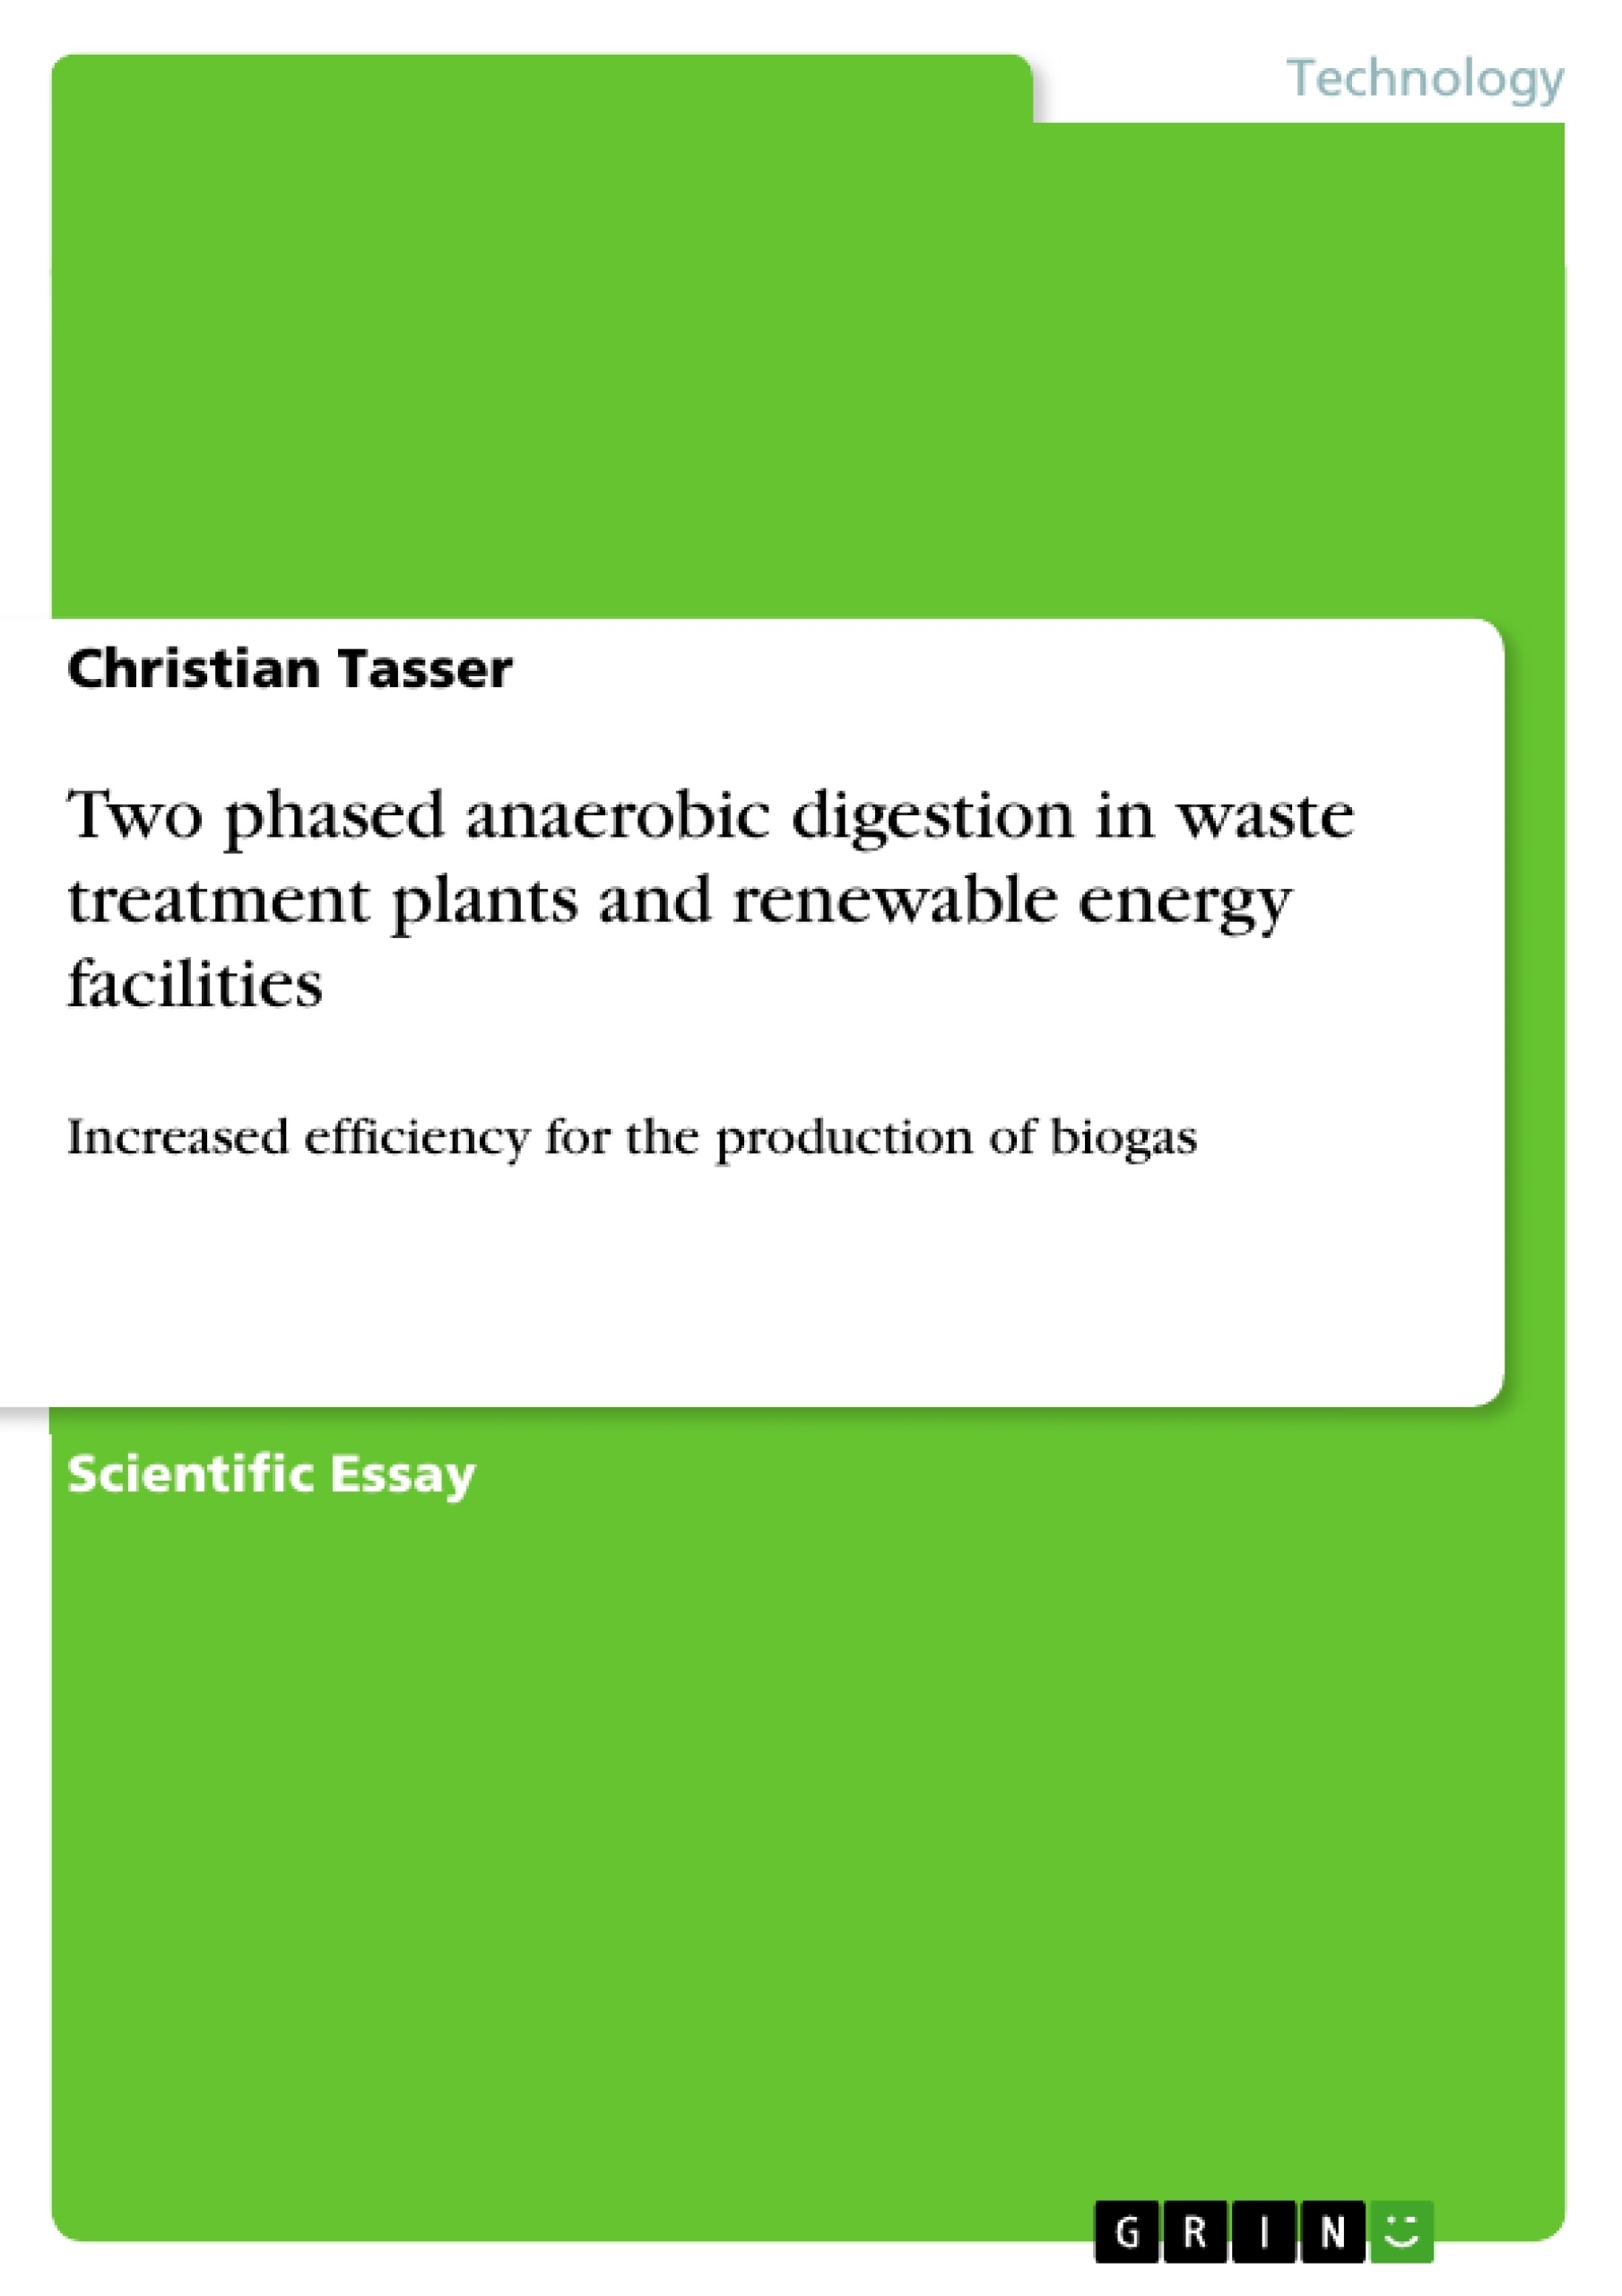 Title: Two phased anaerobic digestion in waste treatment plants and renewable energy facilities